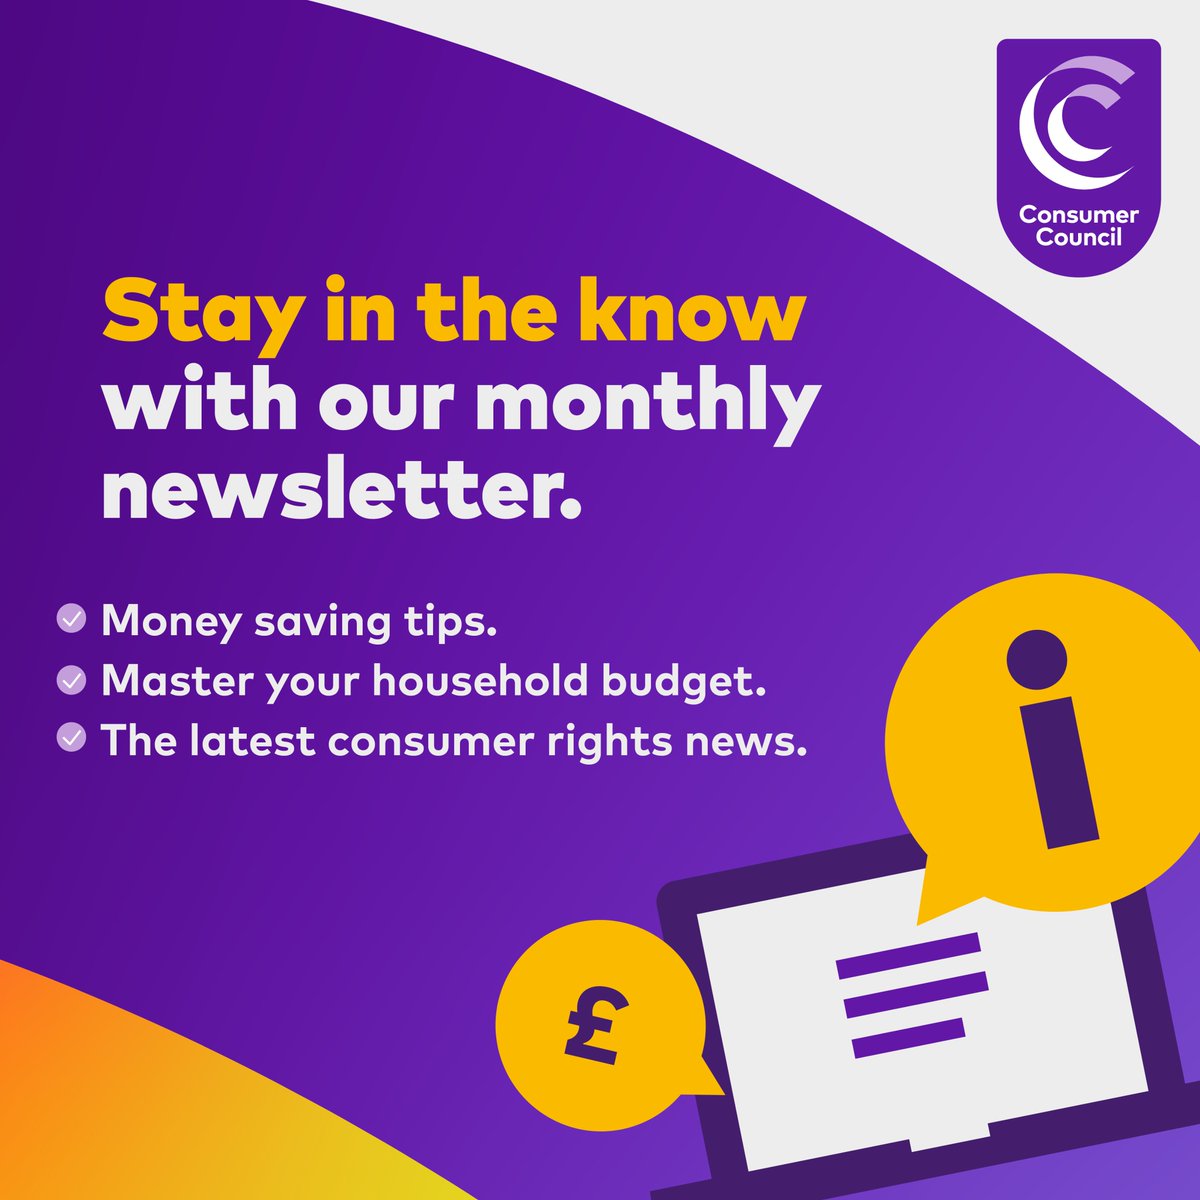 This month's consumer newsletter is now out! We have advice and information on how to keep household bills down, passport tips if you are travelling soon and where you can see us across #NorthernIreland in May. Read it now - mailchi.mp/consumercounci…